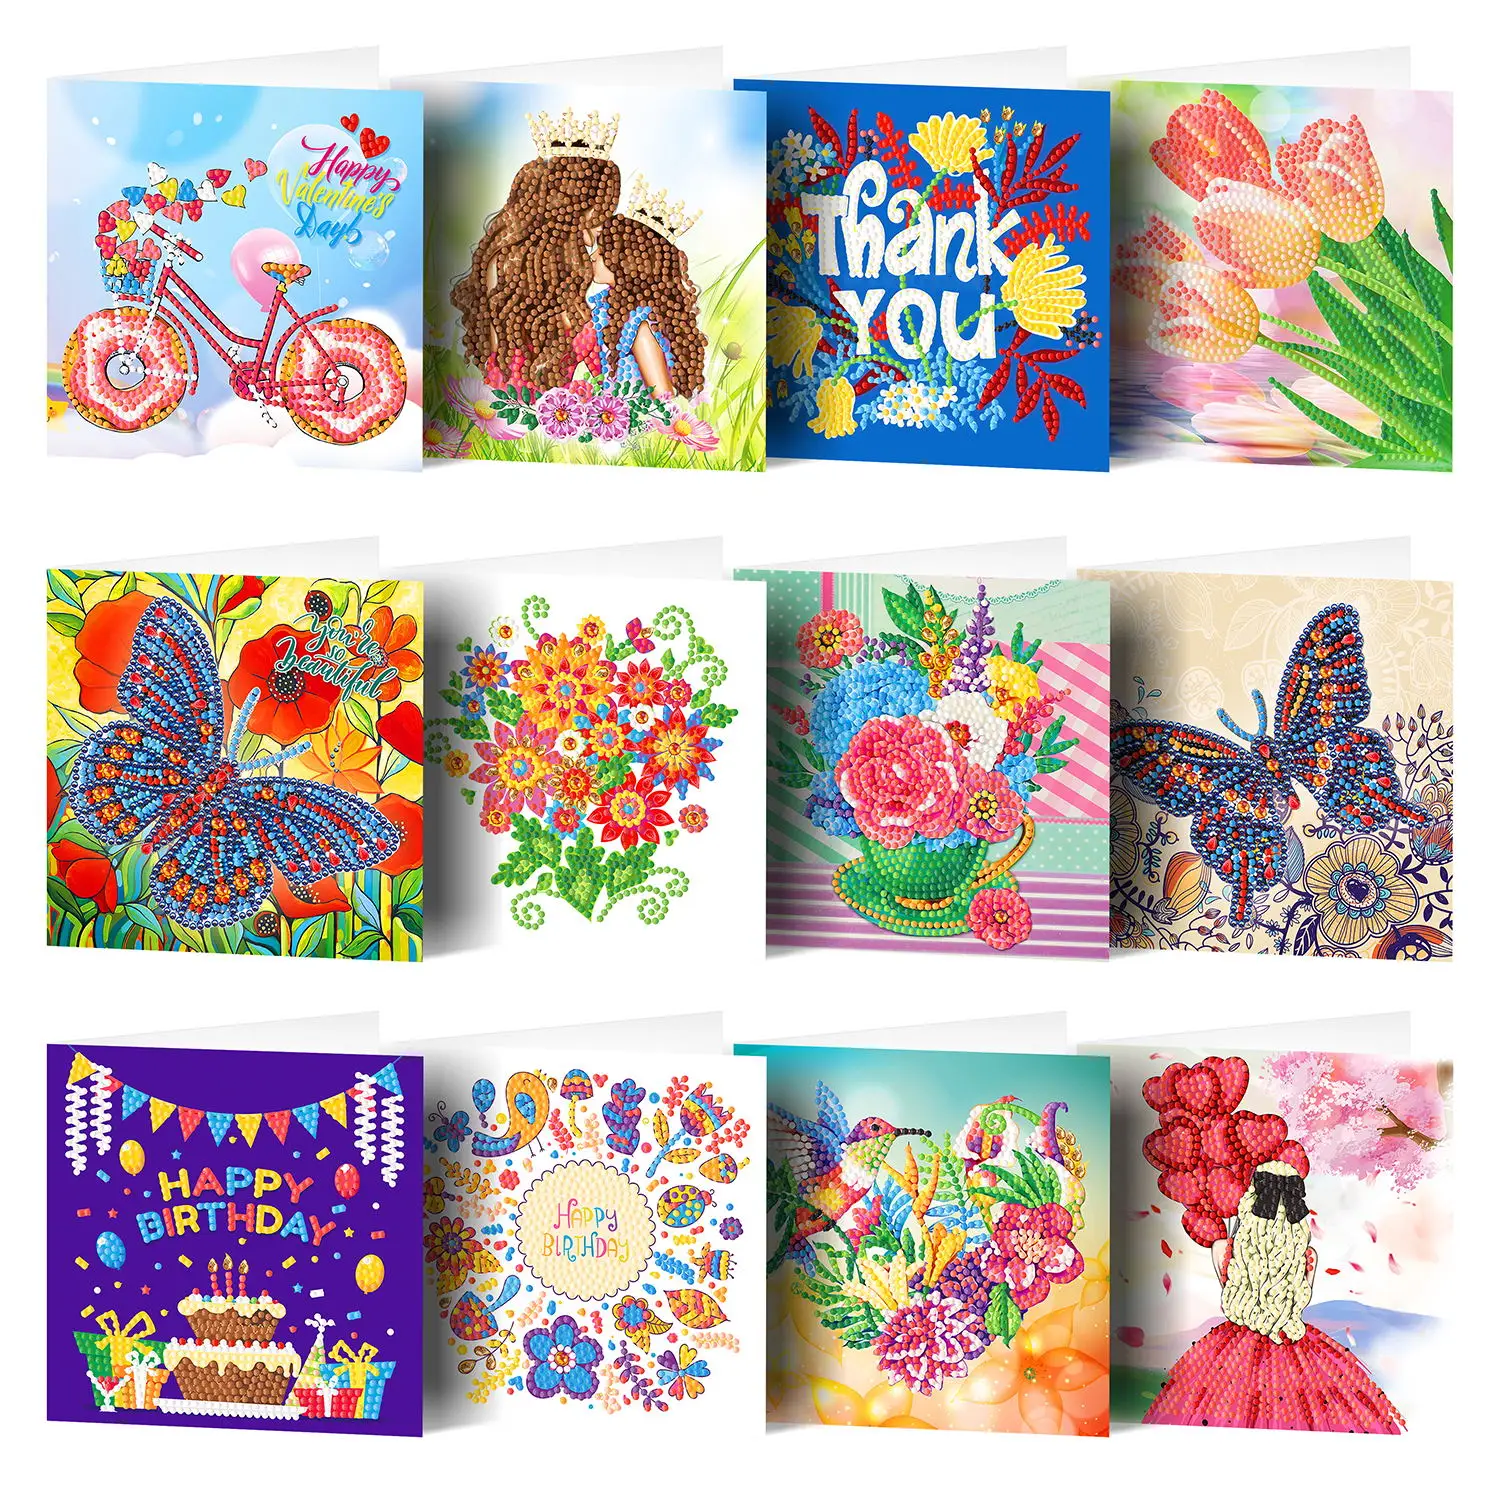 12Pcs Diamond Painting Greeting Cards Cartoon Flower Christmas Birthday Postcards 5D DIY Kid Festival Embroidery Greet Card Gift punch needle rug for beginners Needle Arts & Craft